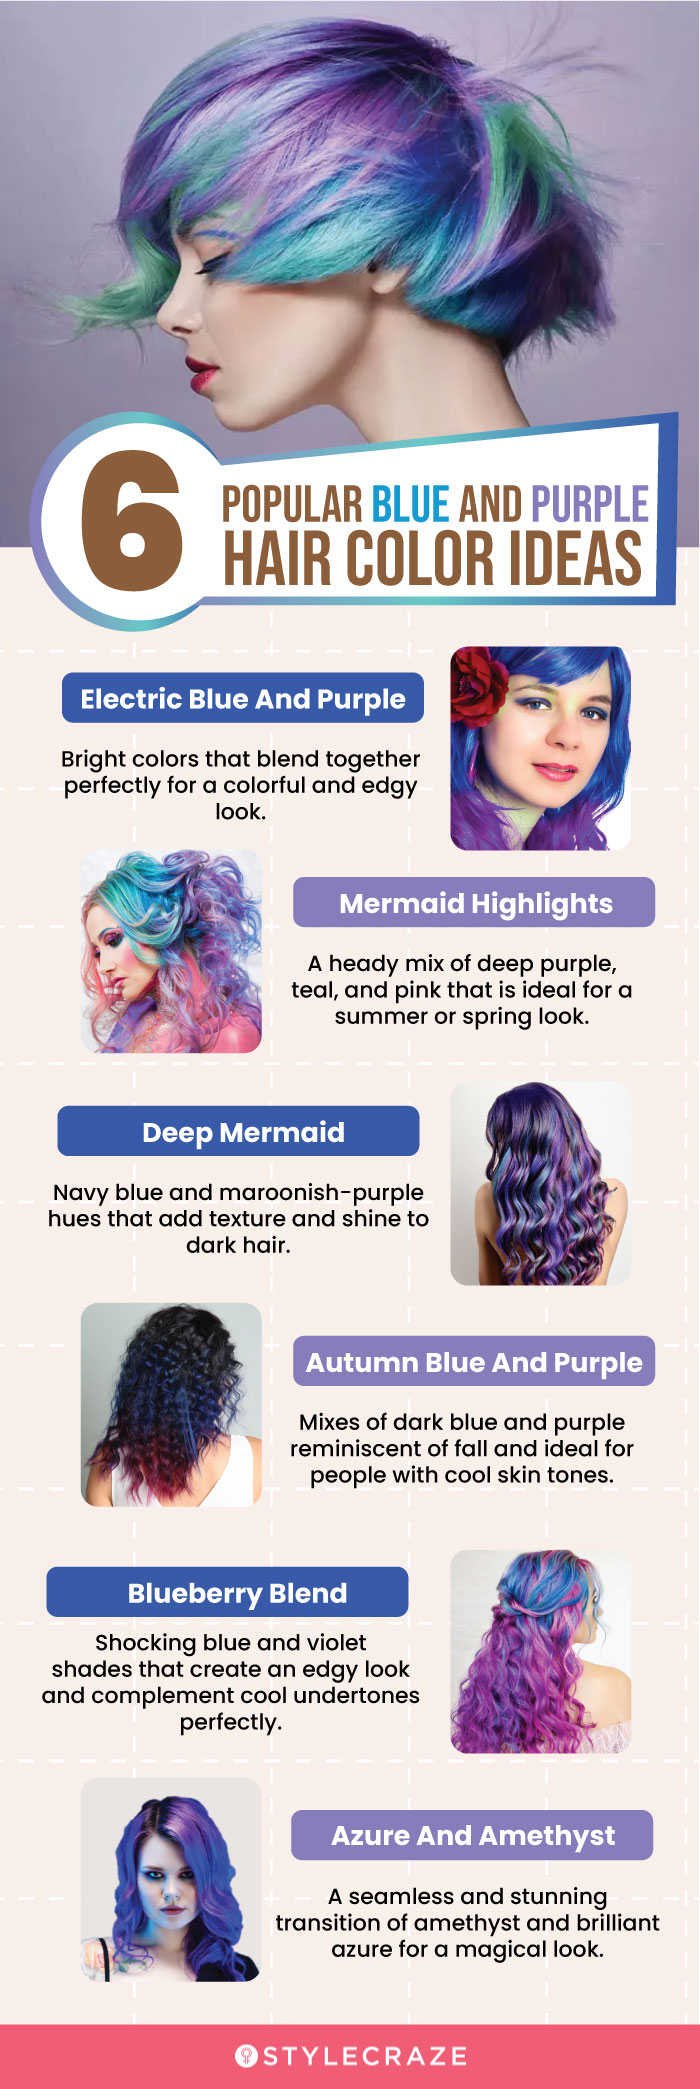 6 popular blue and purple hair color ideas (infographic)